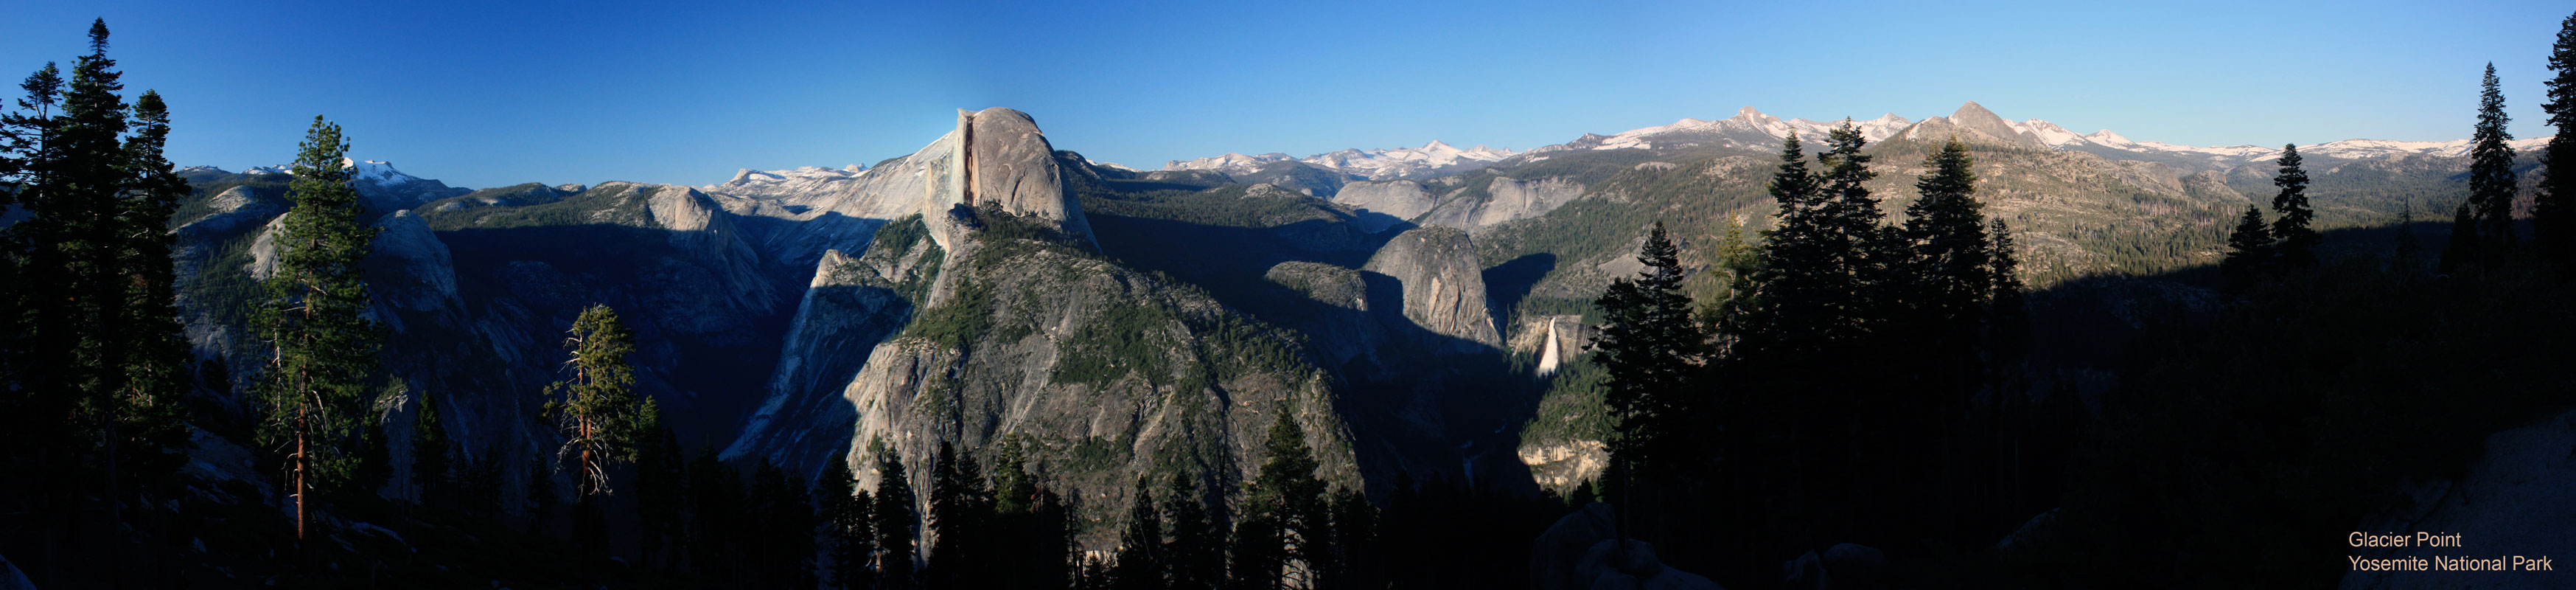 View from Glacier Point, Yosemite